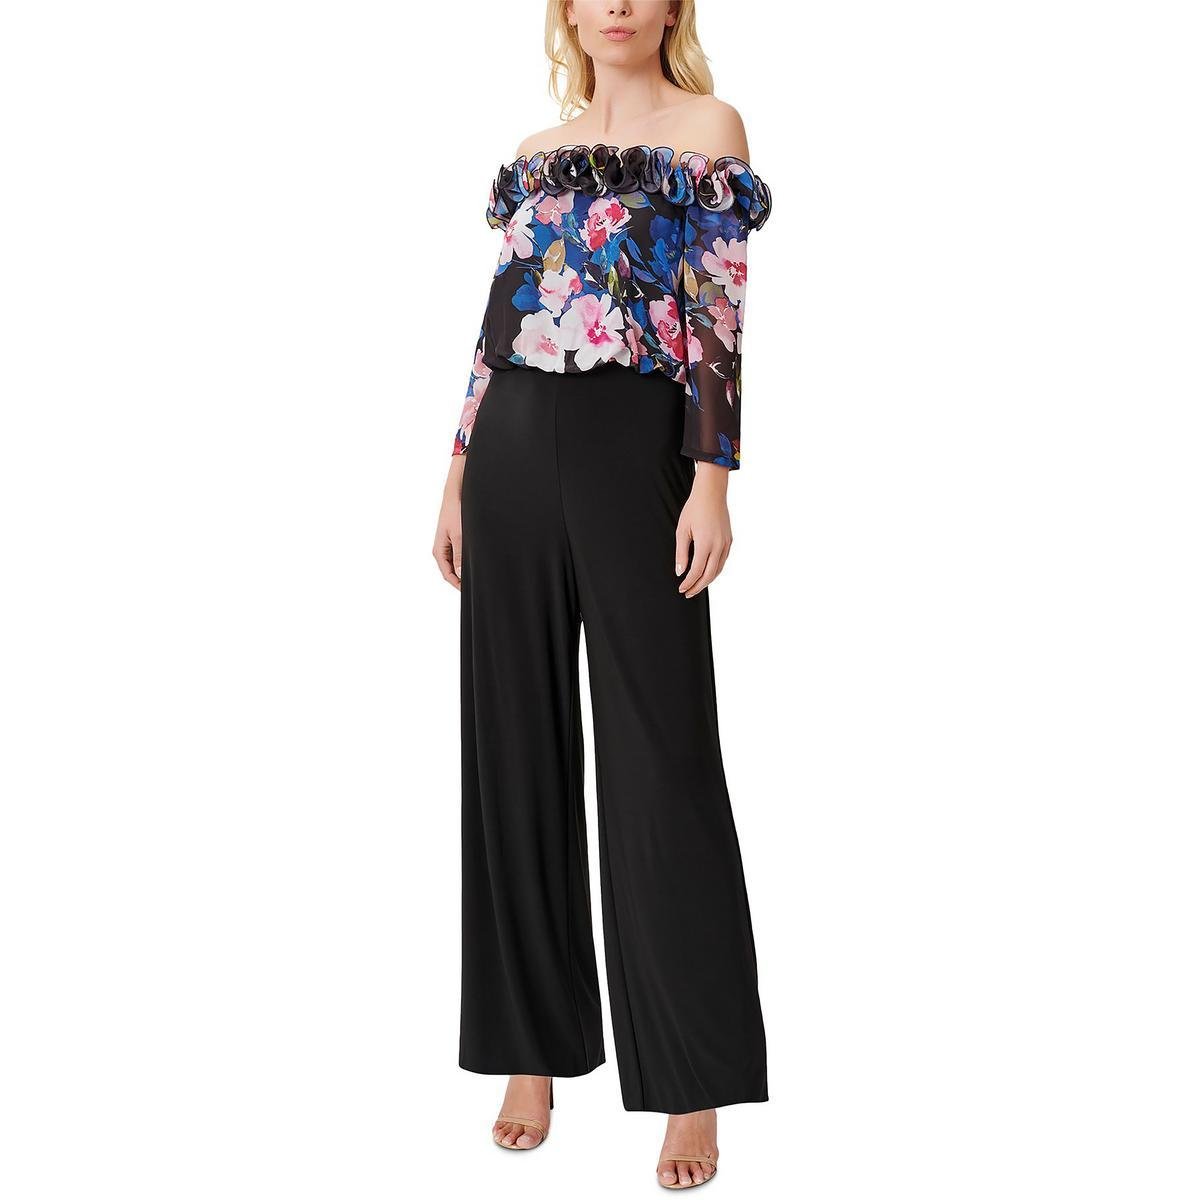 Adrianna Papell Womens Plus Ruffled Floral Print Jumpsuit by ADRIANNA PAPELL